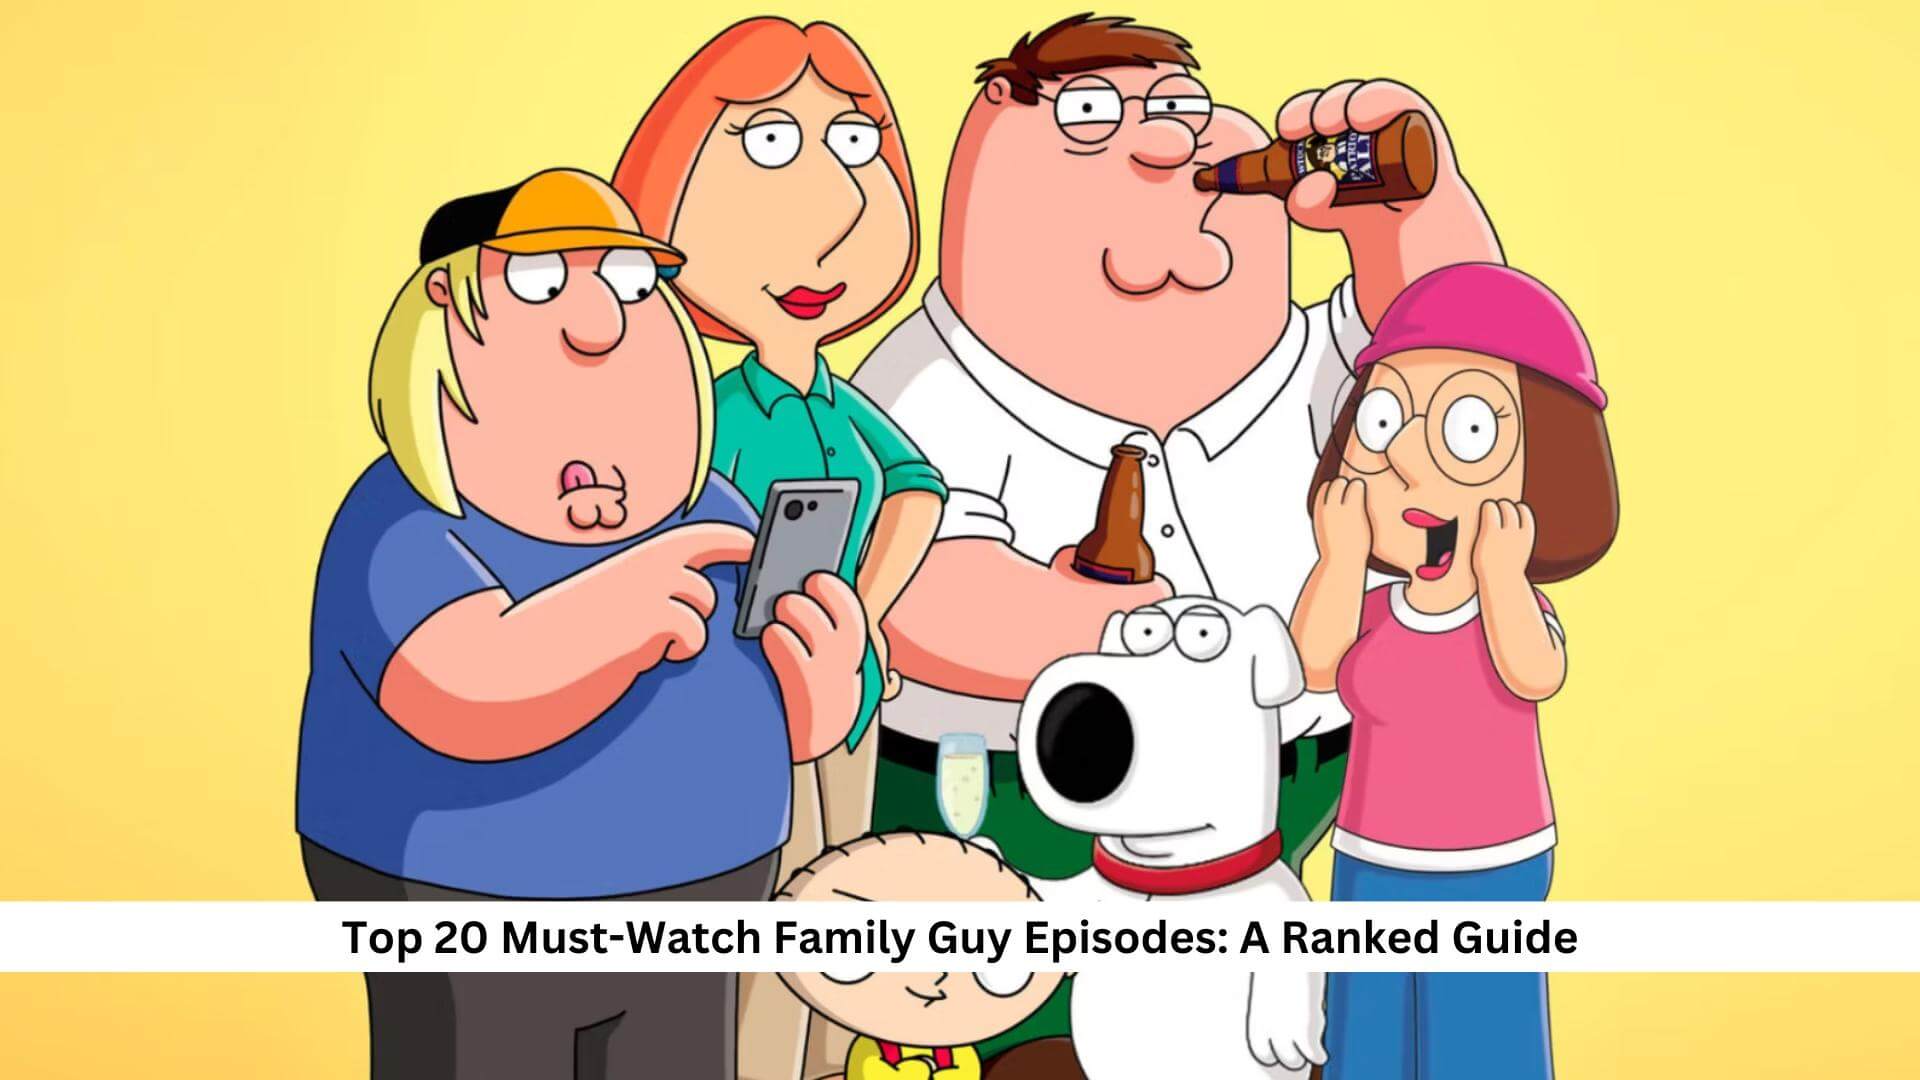 Top 20 Must-Watch Family Guy Episodes: A Ranked Guide